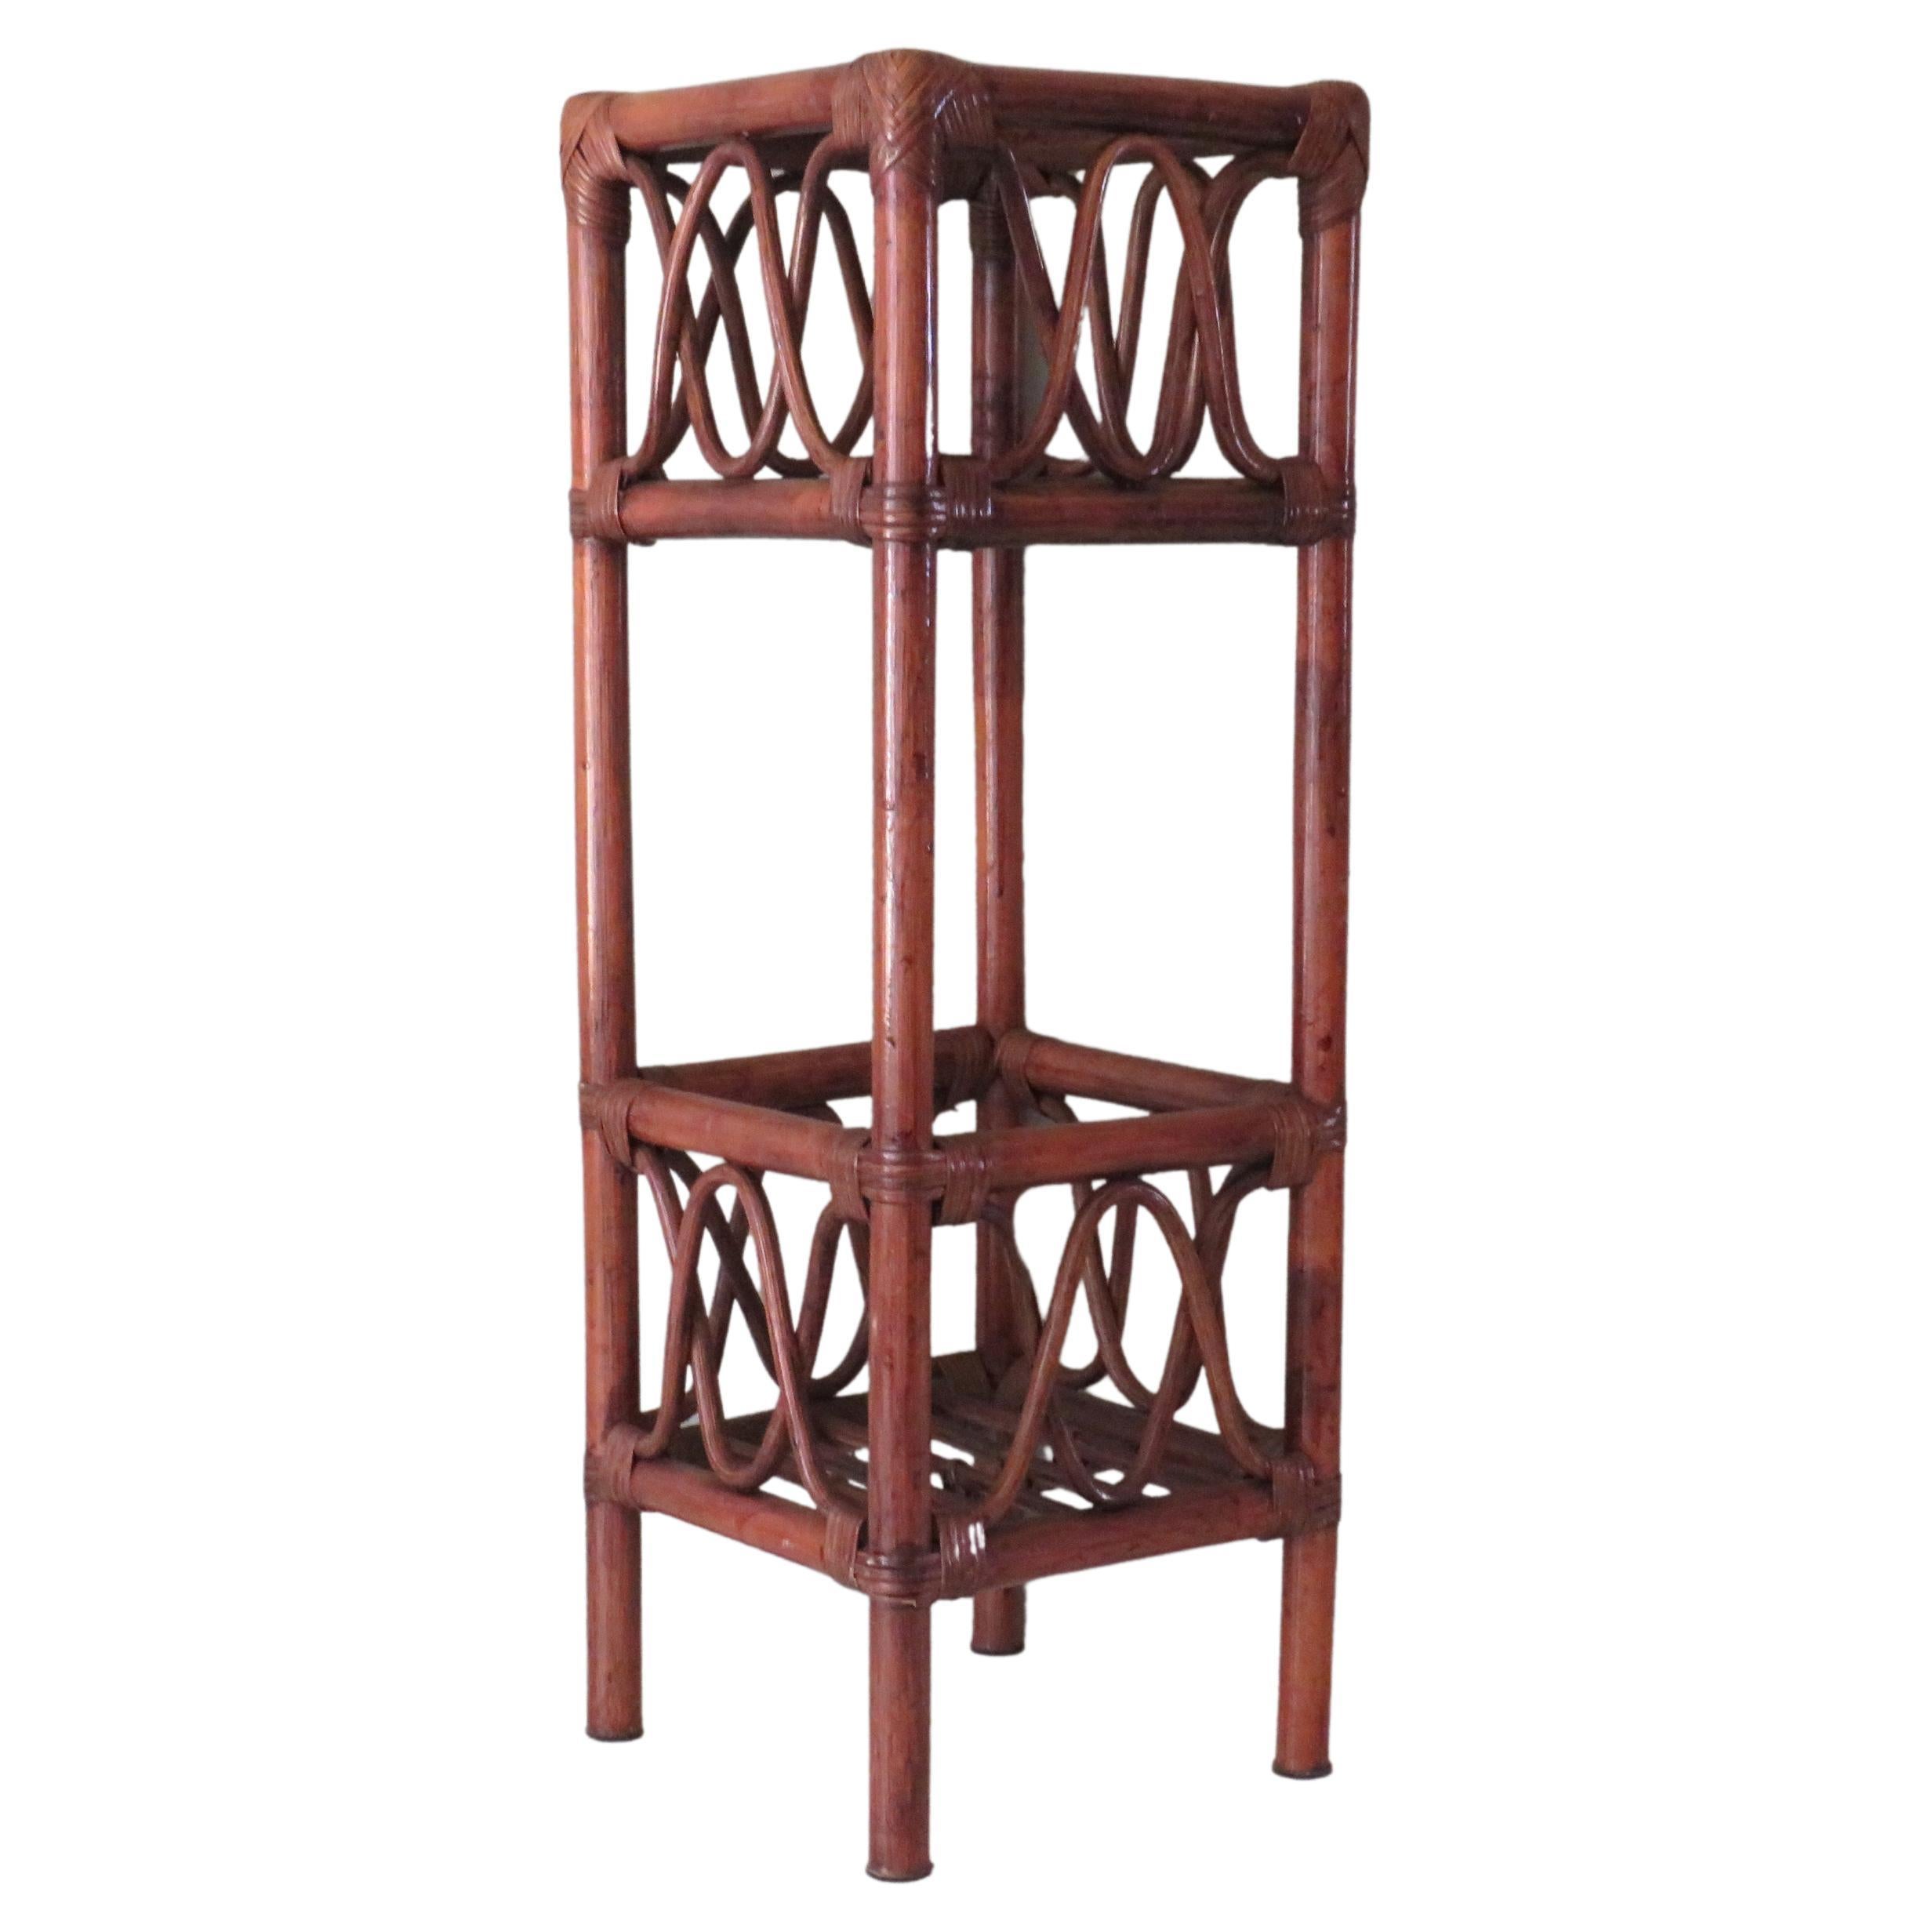 Bohemian Pedestal, High Bamboo Plant Stand, Italy, 1970s